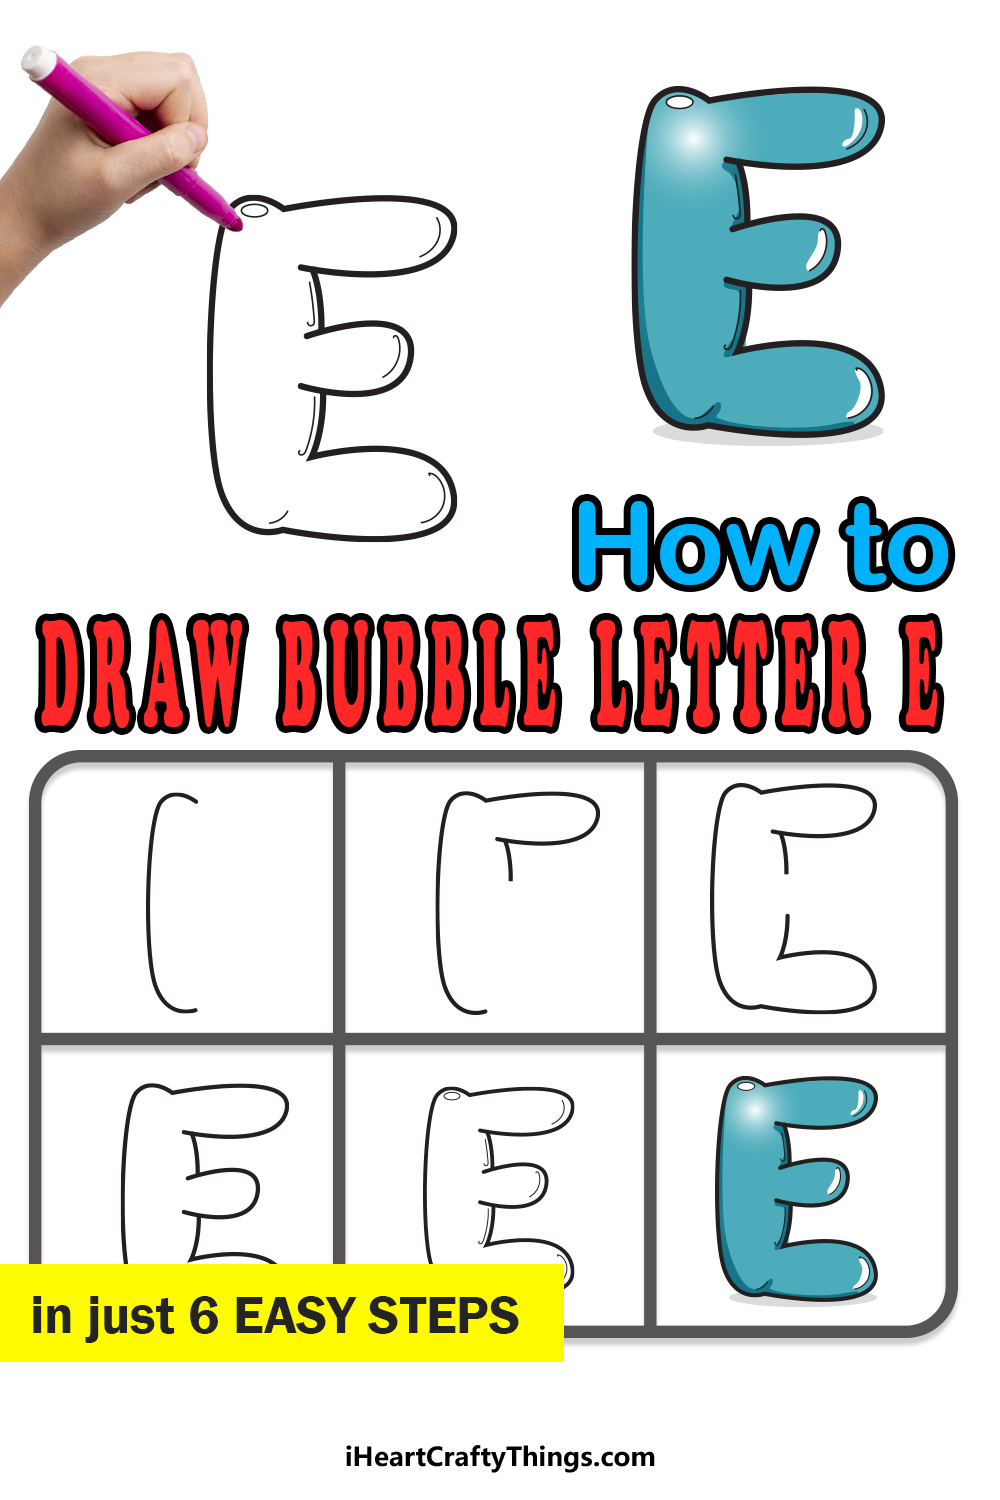  How To Draw Your Own Bubble E step by step guide